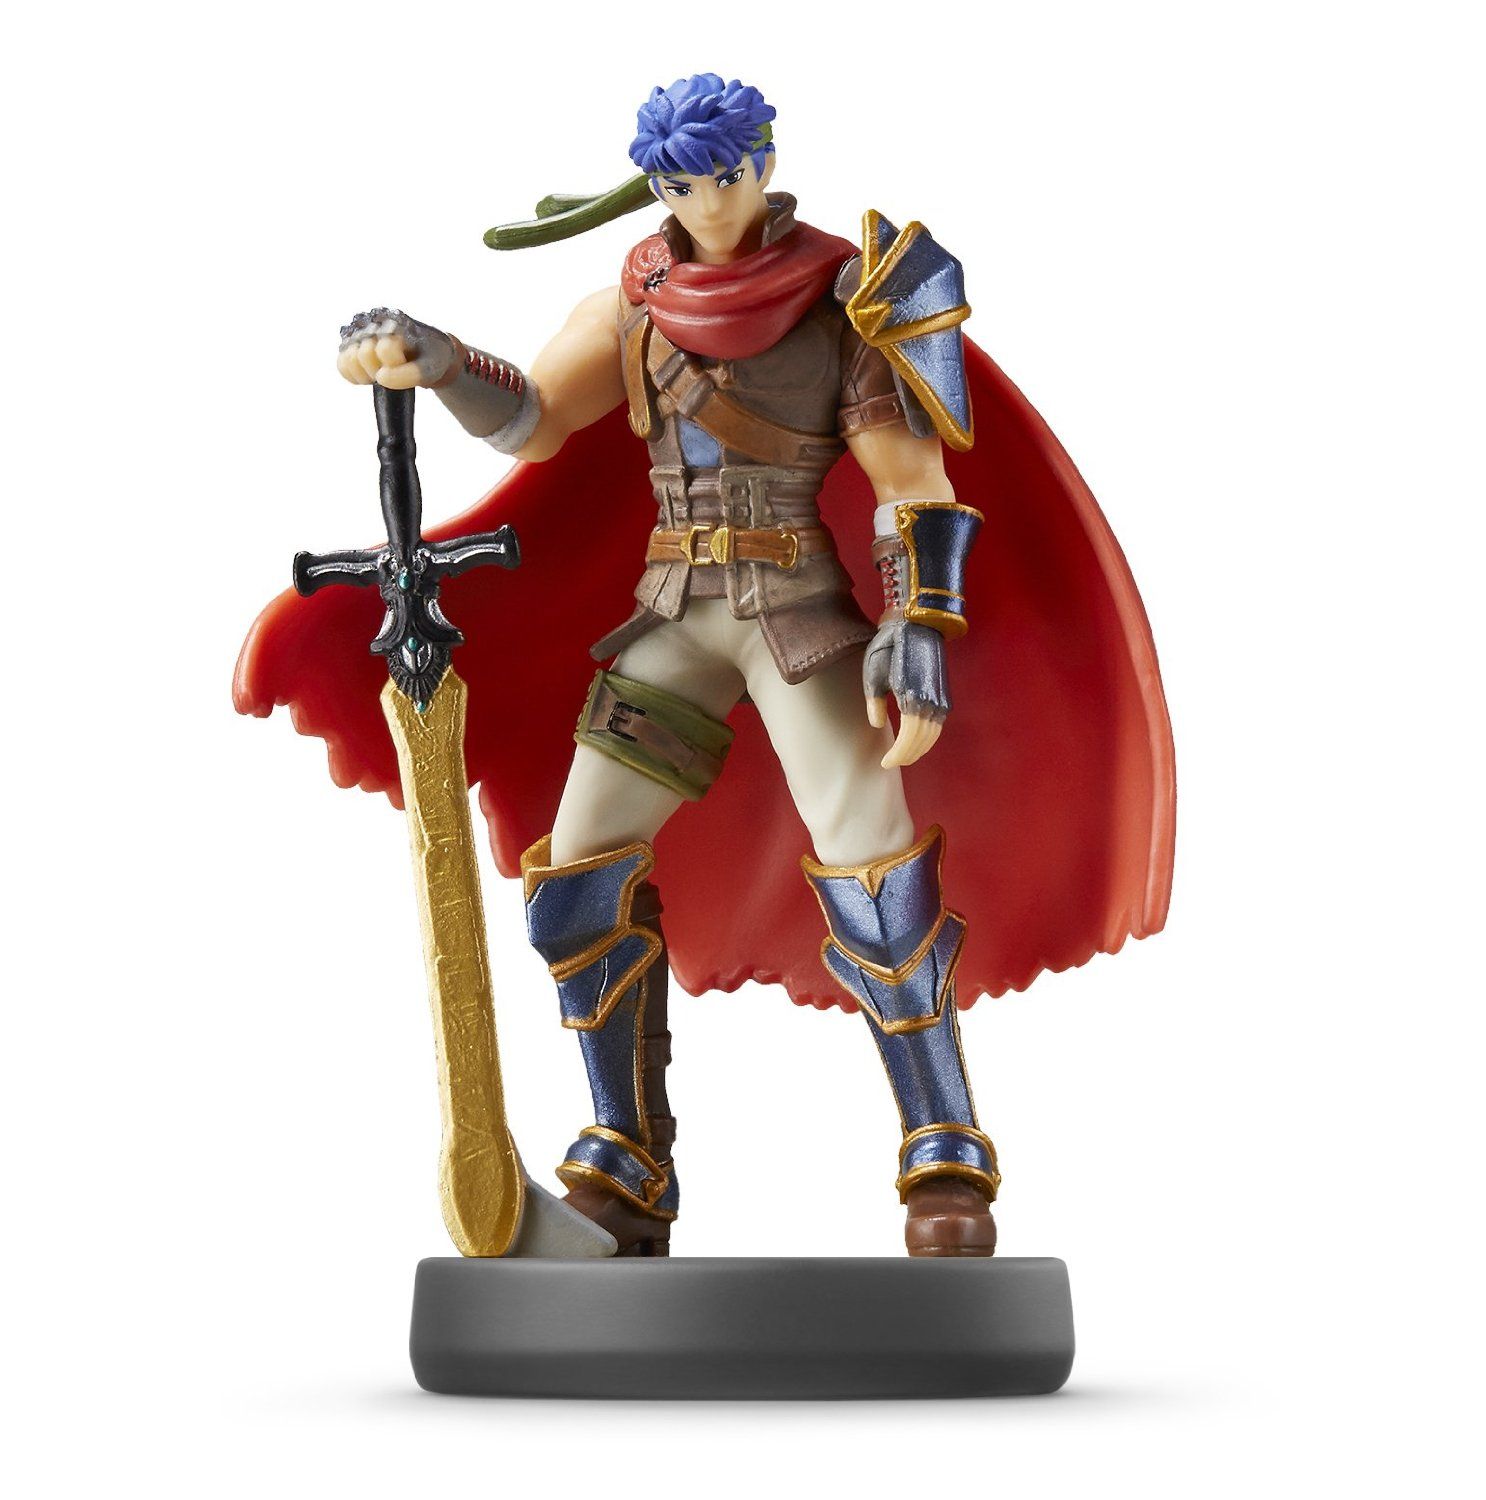 can you buy amiibos online